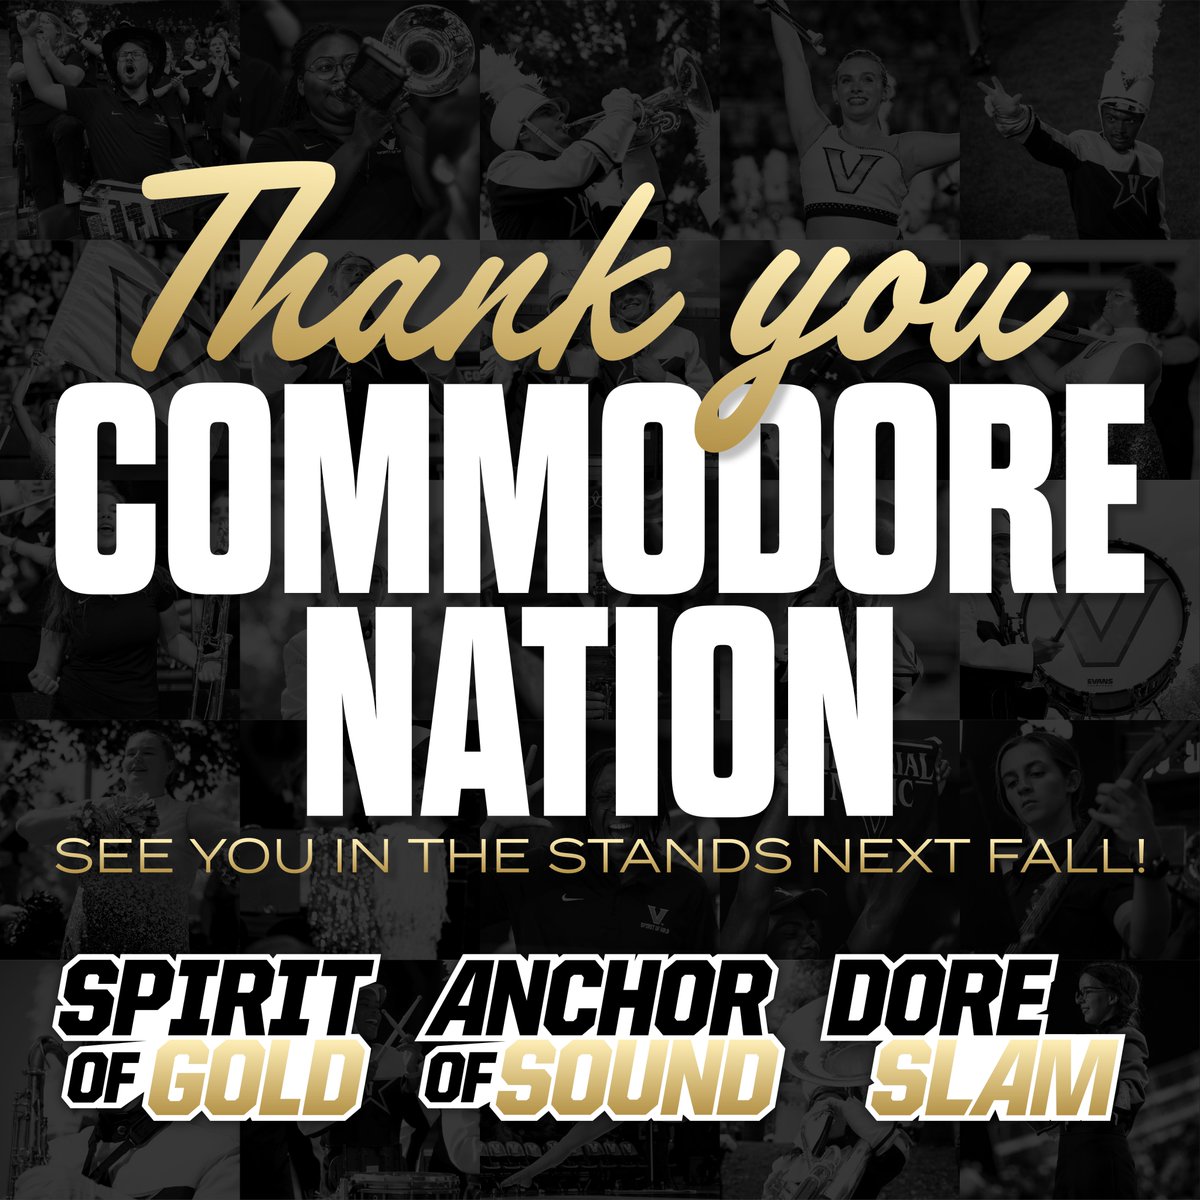 Thank you, Commodore Nation!

Whether we were at FirstBank Stadium, the Plex, Memorial Gym, or on the road we could feel your support all season long!

Thank you for an amazing year - we'll see you in the stands next fall!
#AnchorDown #SOGILTB @vucommodores @VanderbiltU @VandyNCC